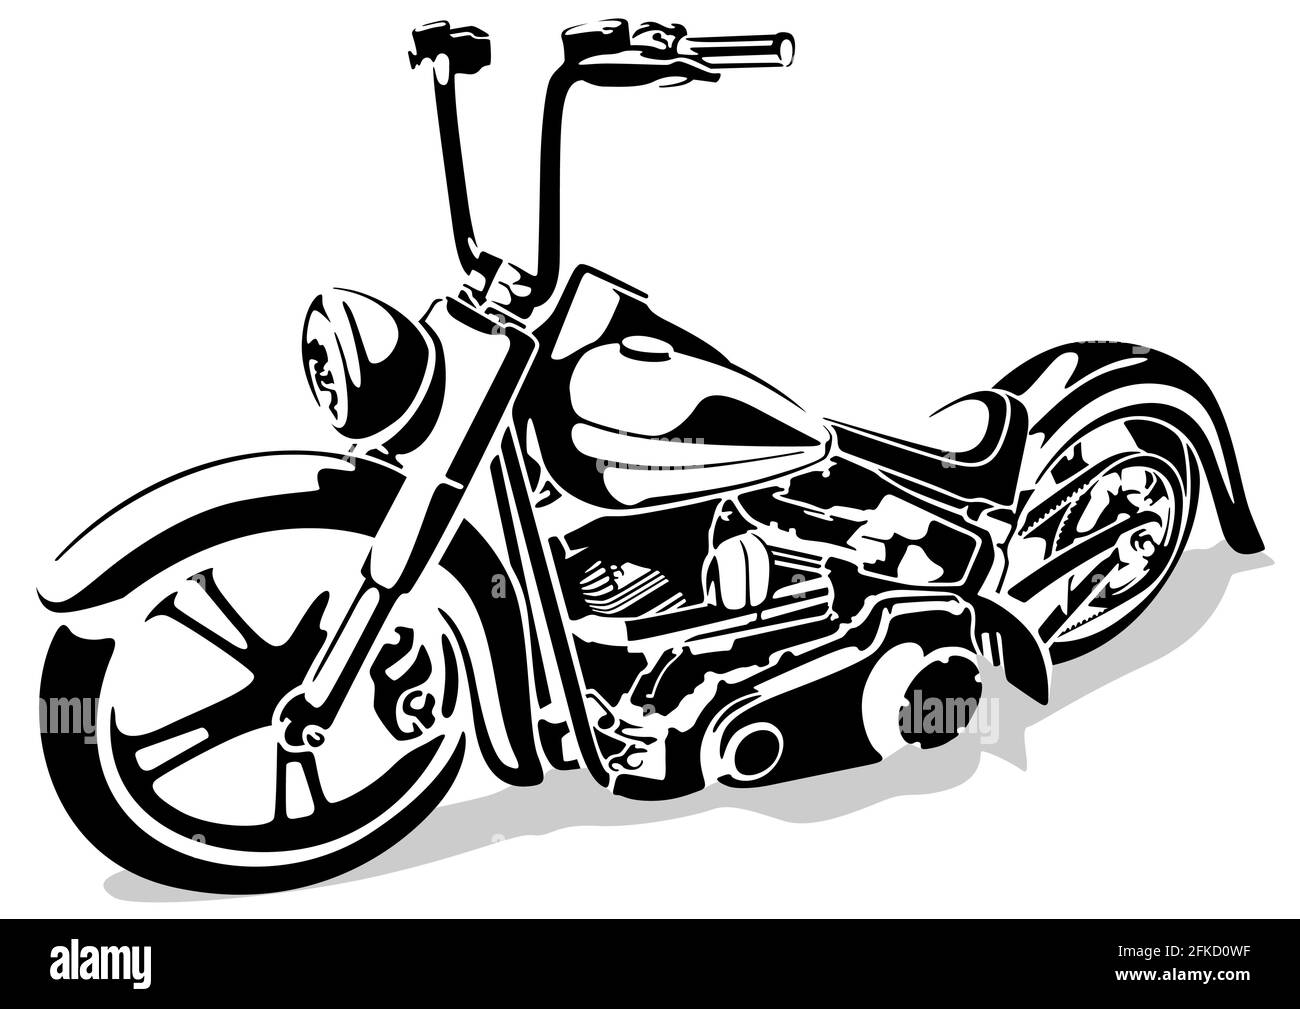 Harley davidson motorcycle engine logo Cut Out Stock Images & Pictures -  Alamy